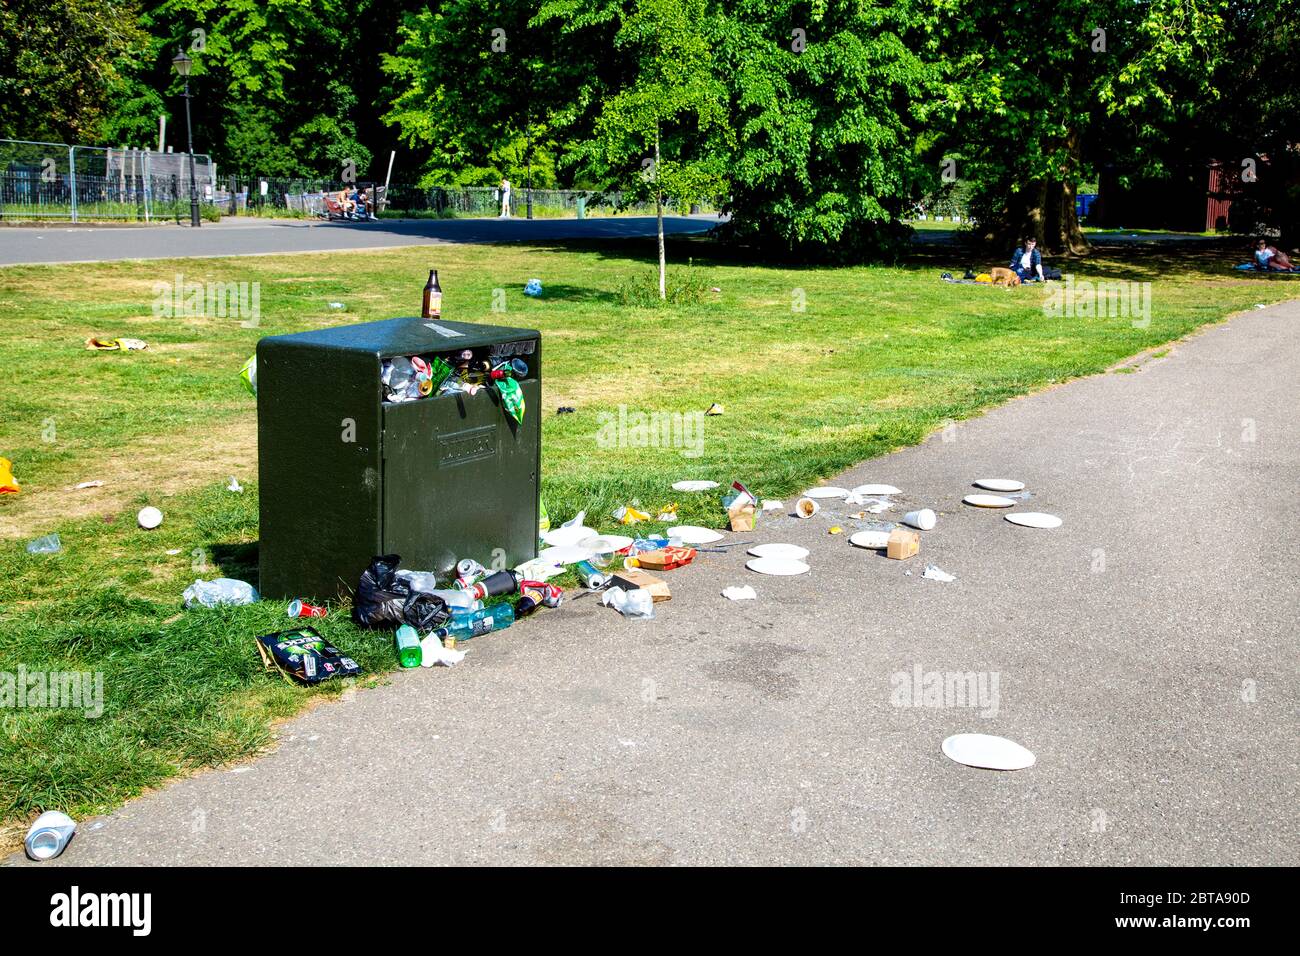 A litter bin in a park overflowing and full of rubbish, rubbish scattered on the lawn and path (Battersea Park, London, UK) Stock Photo